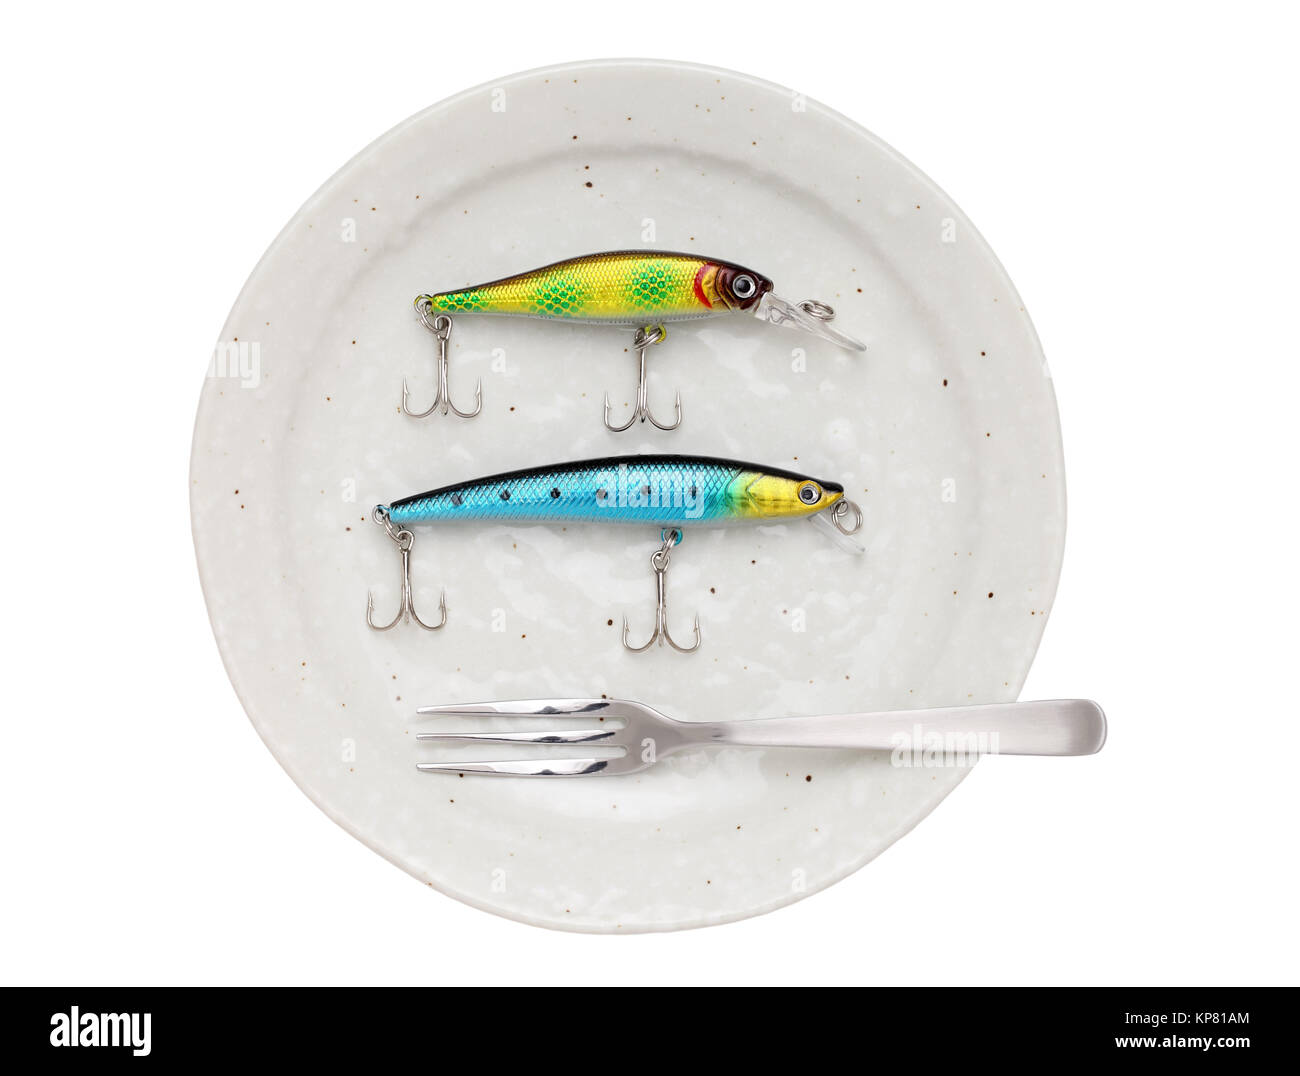 Plastic fishing lure on plate Stock Photo